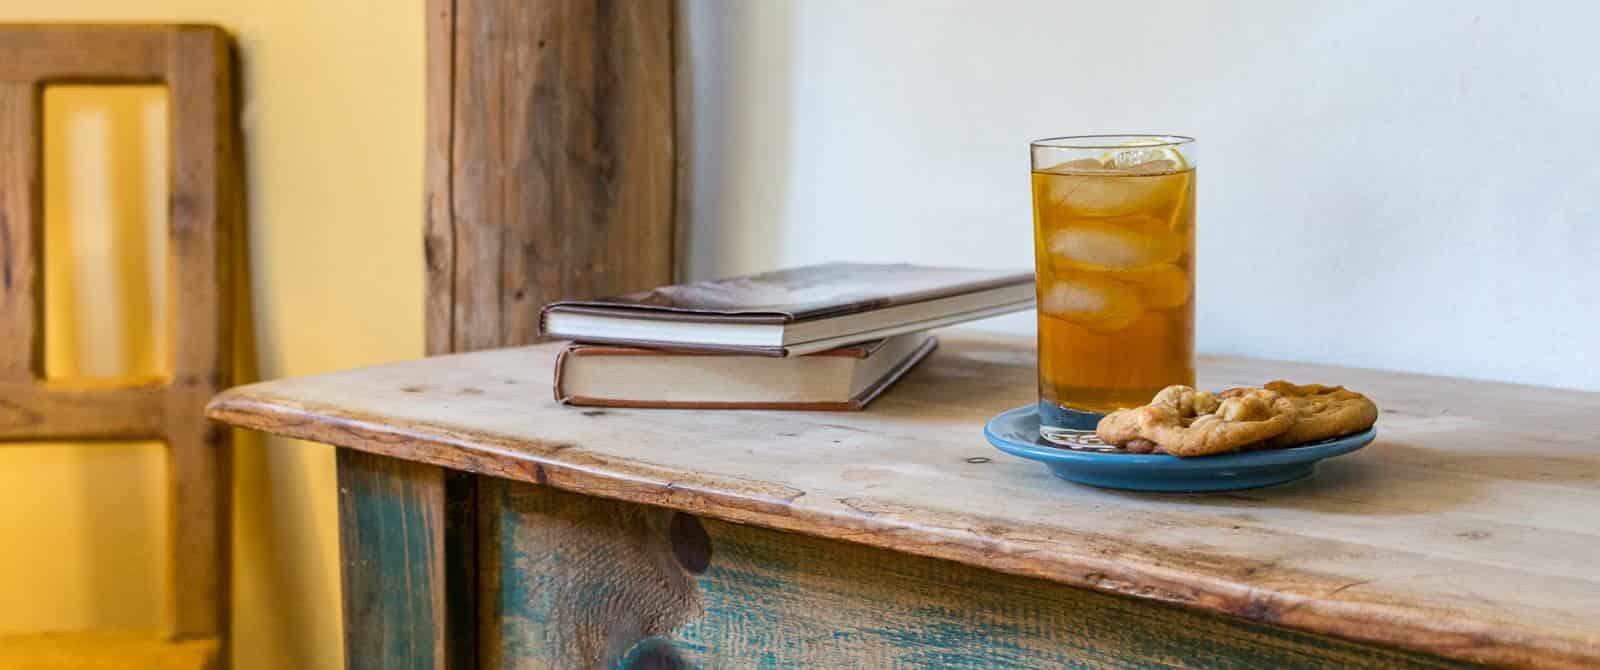 Cookies and iced tea on a blue plate next to stacked books on a distressed wooden dresser.